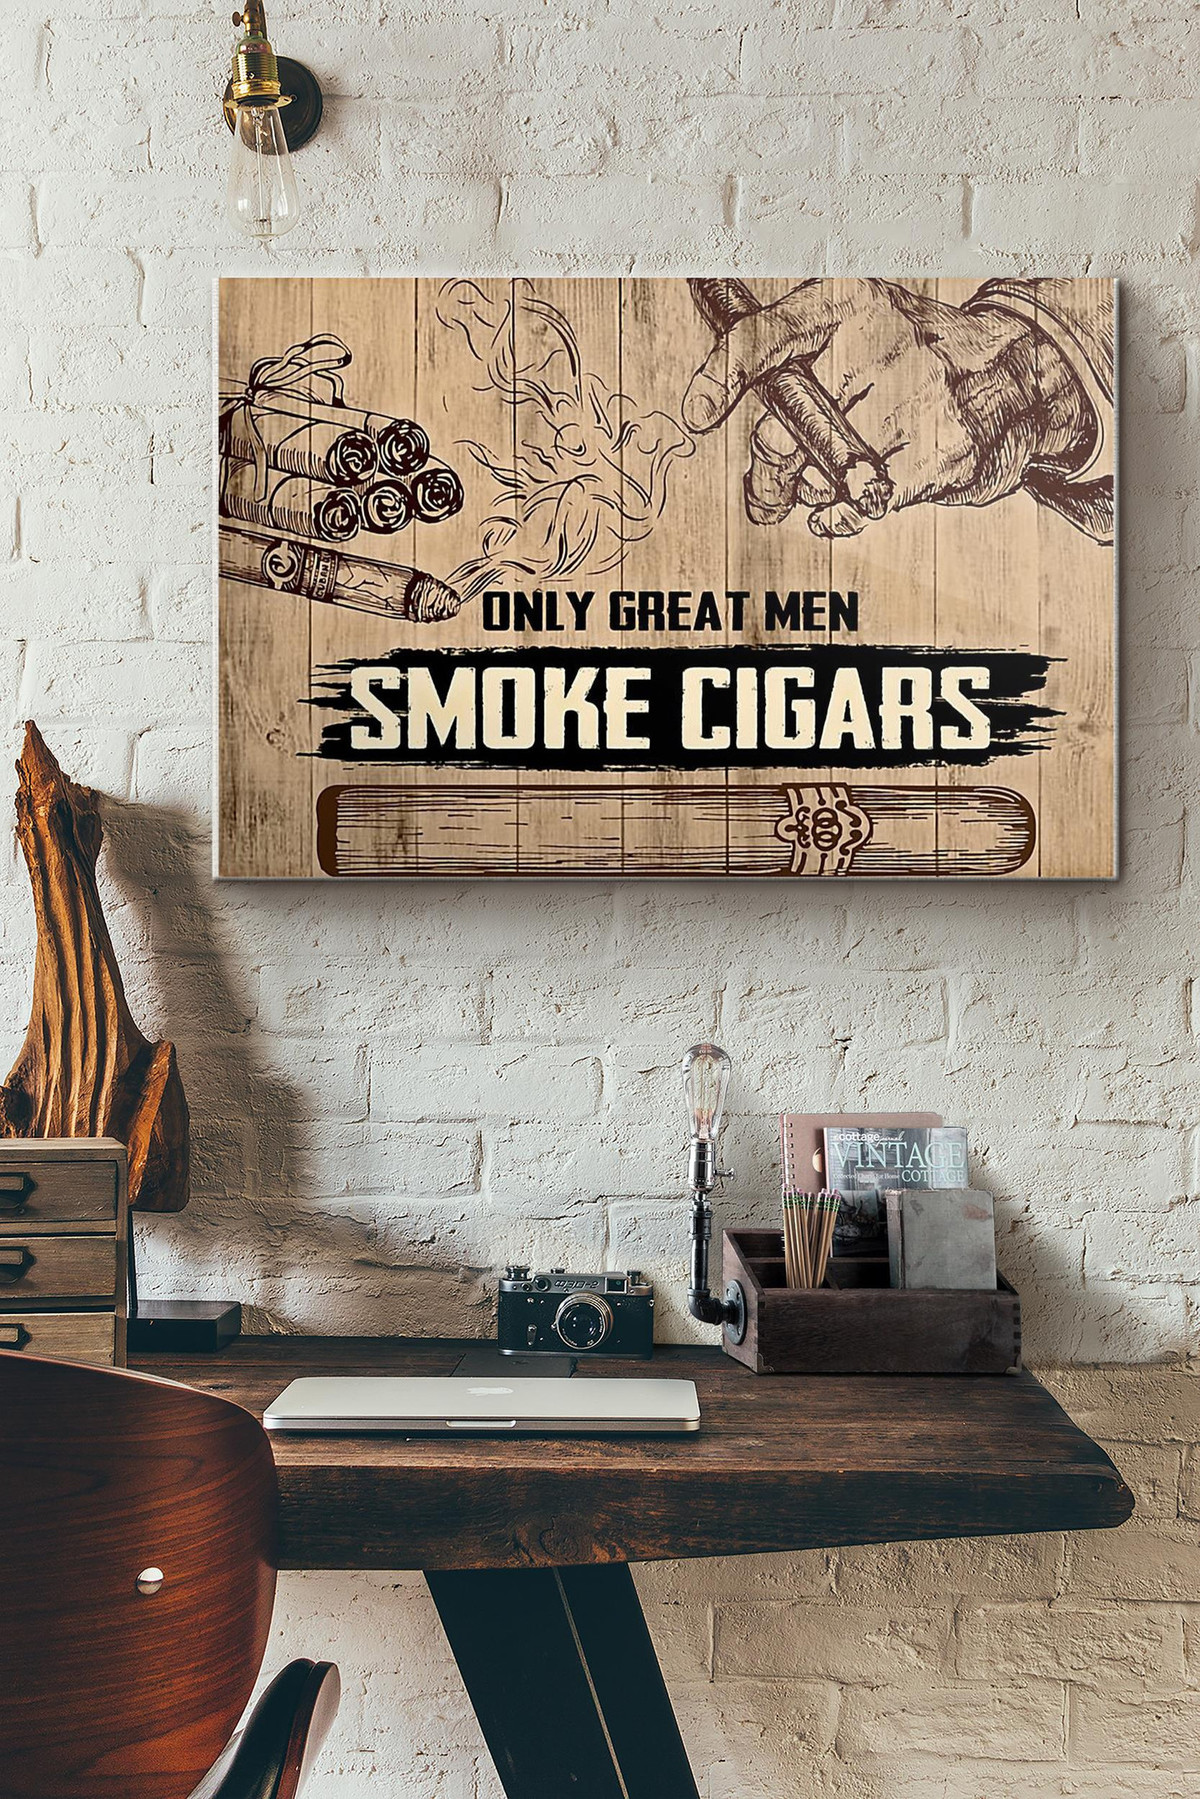 Only Great Men Smoke Cigars Canvas Painting Ideas, Canvas Hanging Prints, Gift Idea Framed Prints, Canvas Paintings Wrapped Canvas 8x10